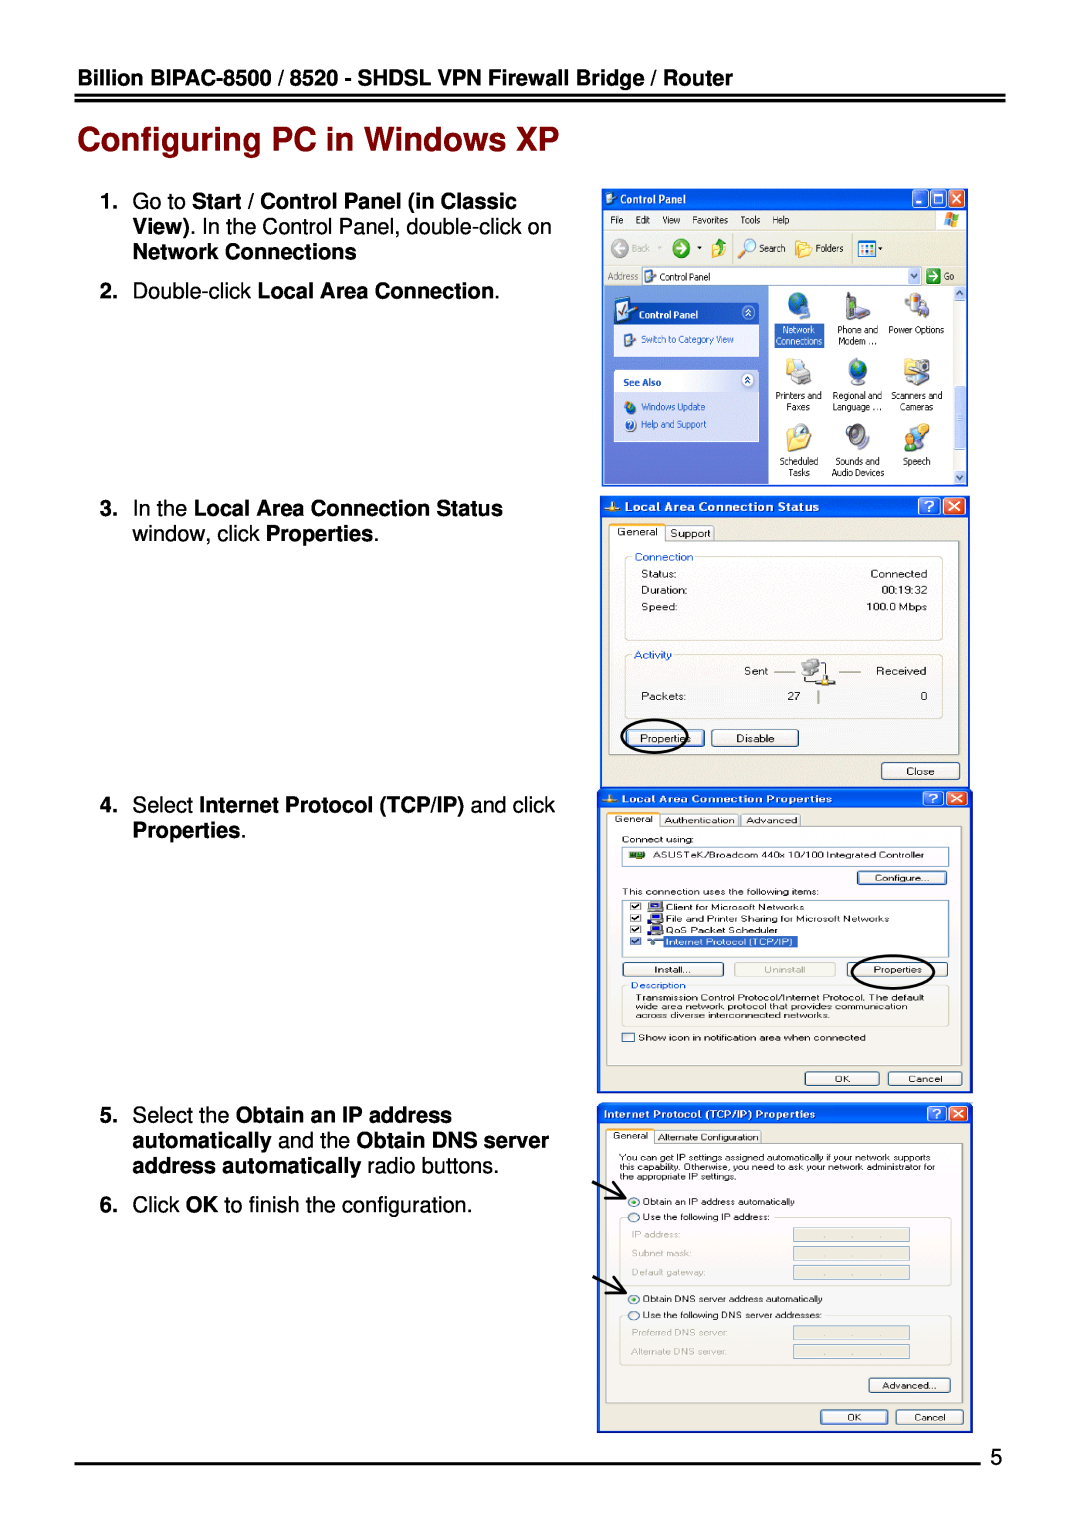 Billion Electric Company 8520 Configuring PC in Windows XP, In the Local Area Connection Status window, click Properties 